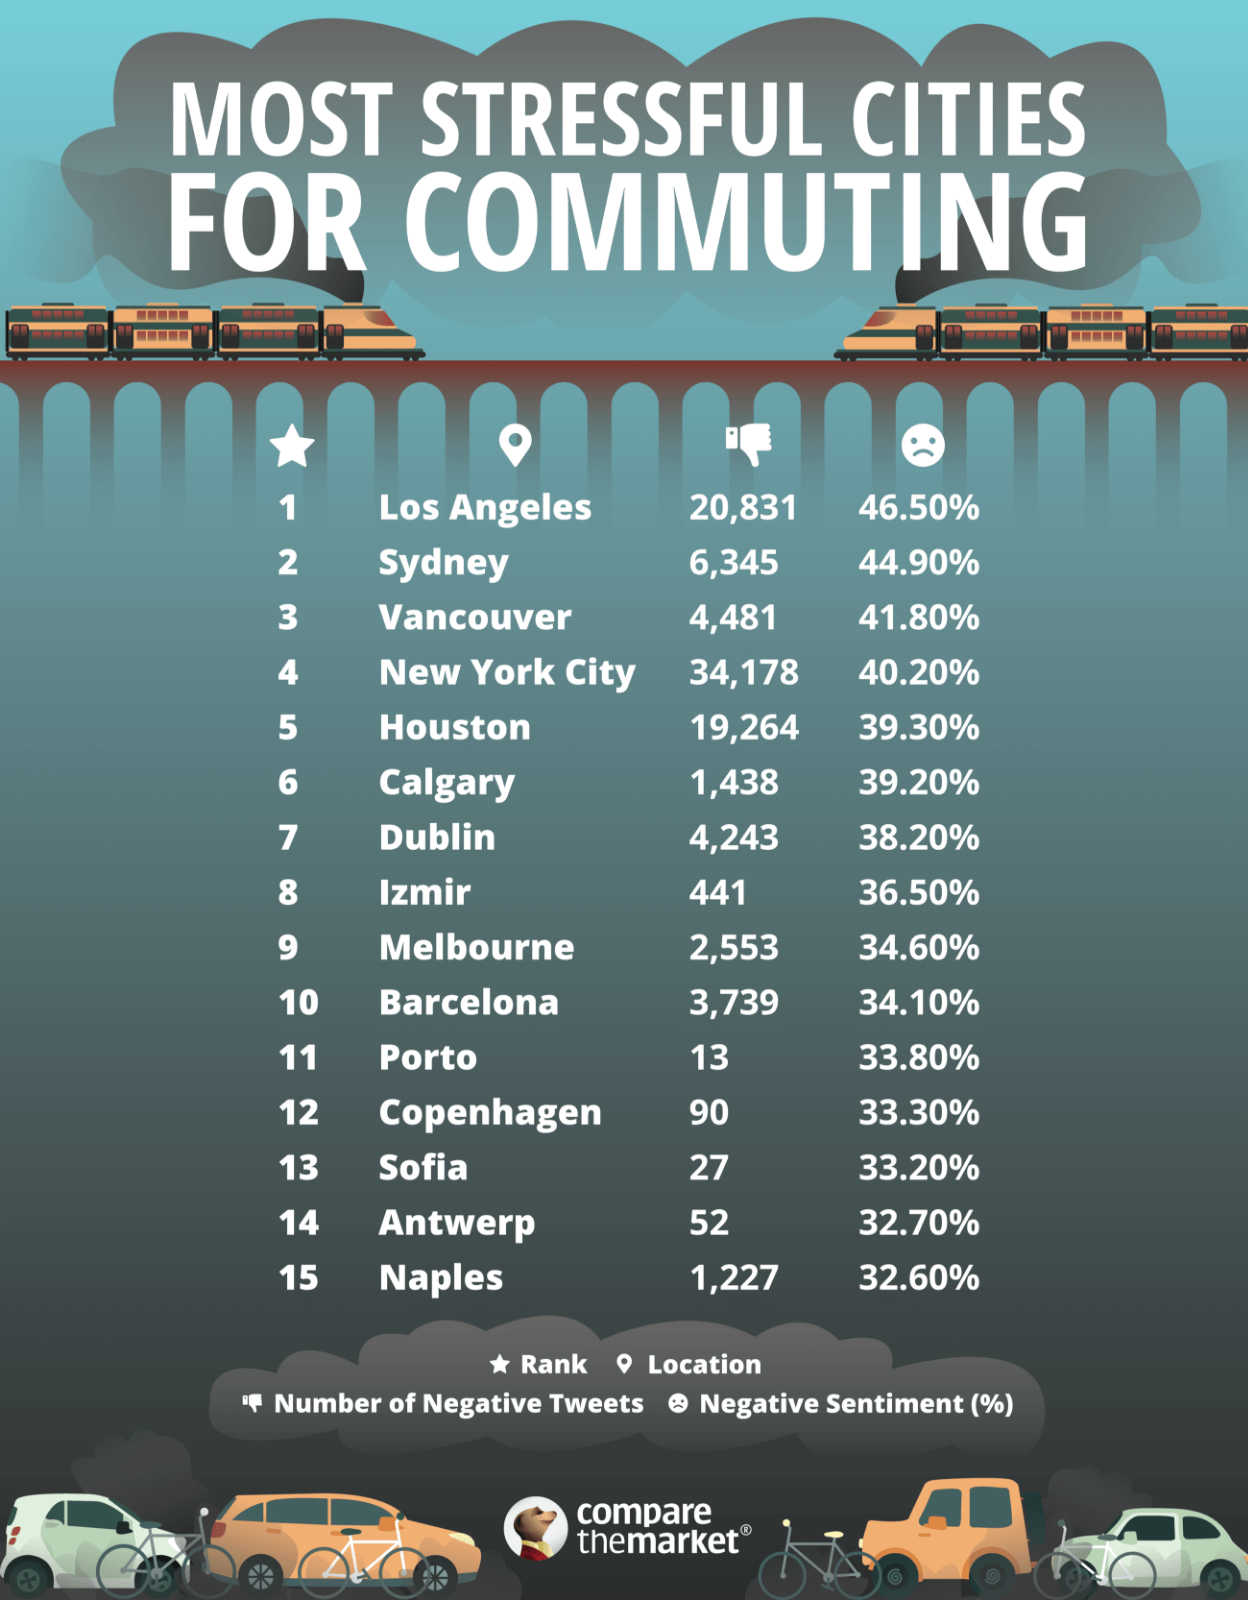 Image showing the most stressful cities around the world for commuting.